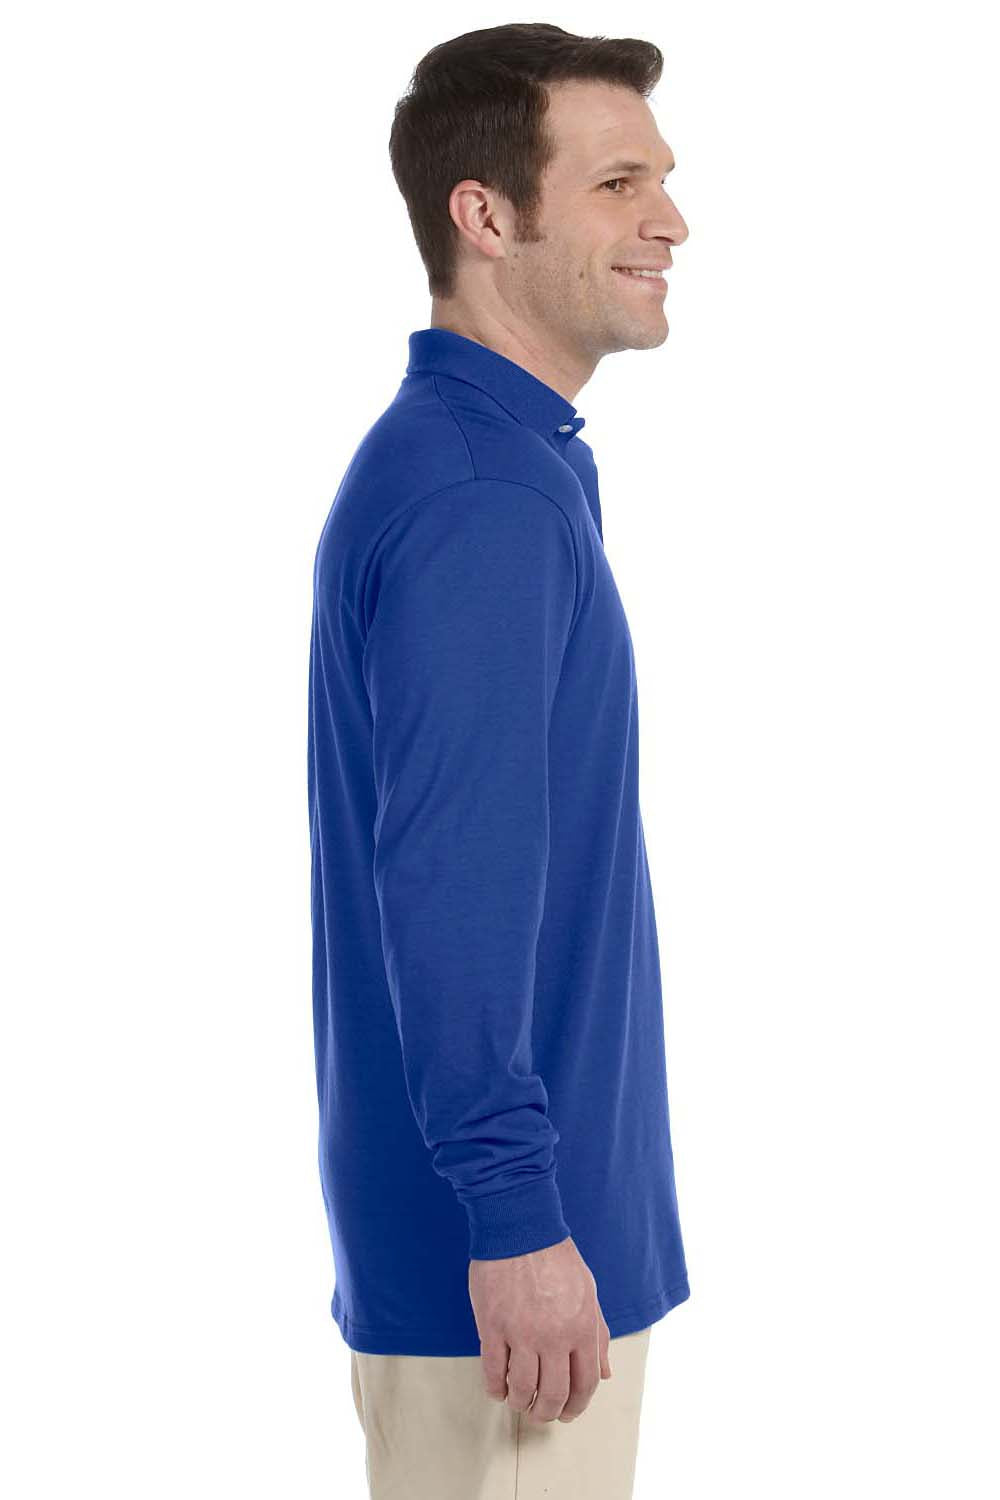 Jerzees 437ML Mens SpotShield Stain Resistant Long Sleeve Polo Shirt Royal Blue Side